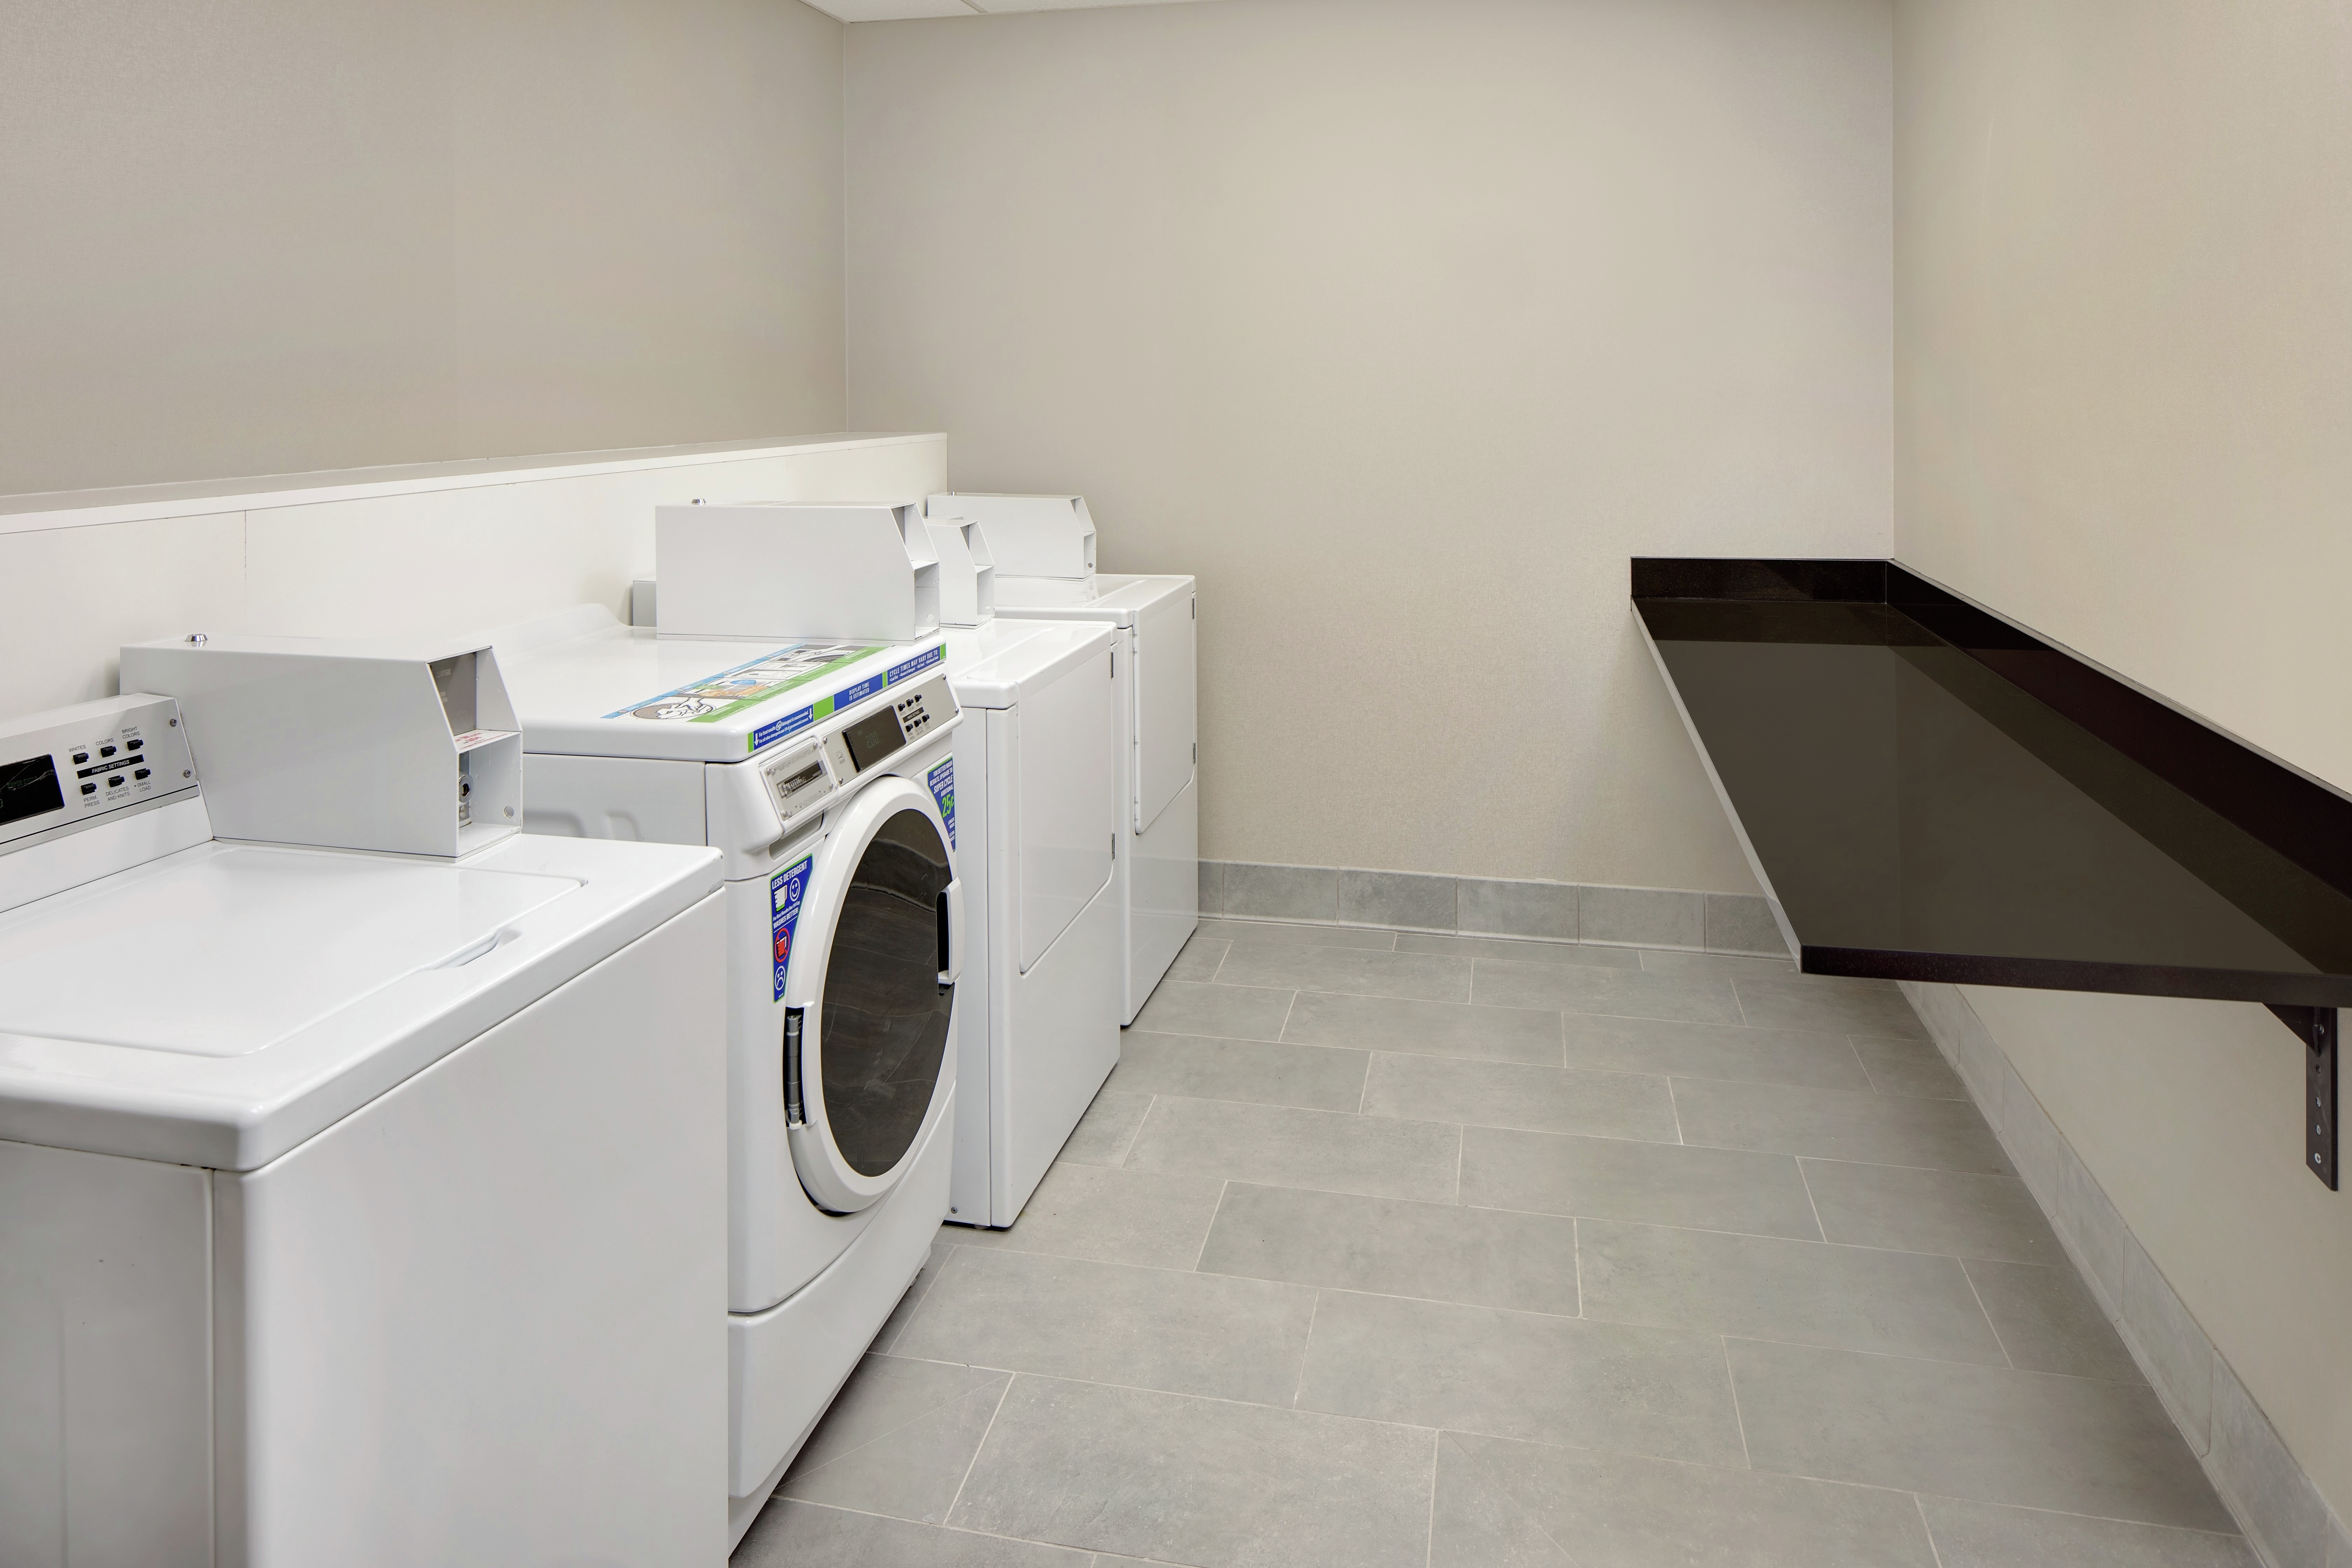 Washing Machines in Laundry Room